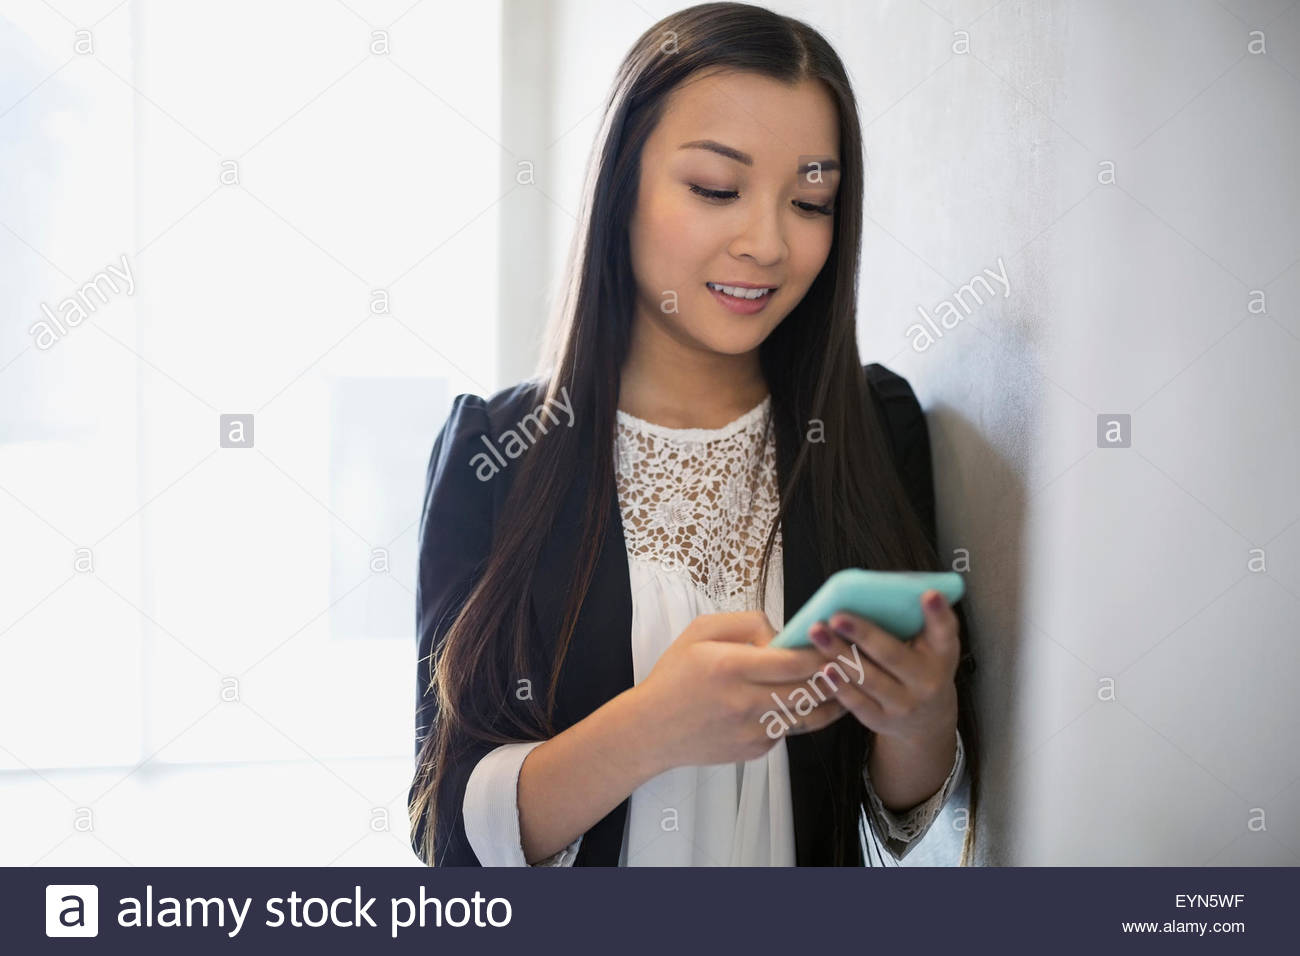 Woman texting with cell phone leaning on wall Stock Photo